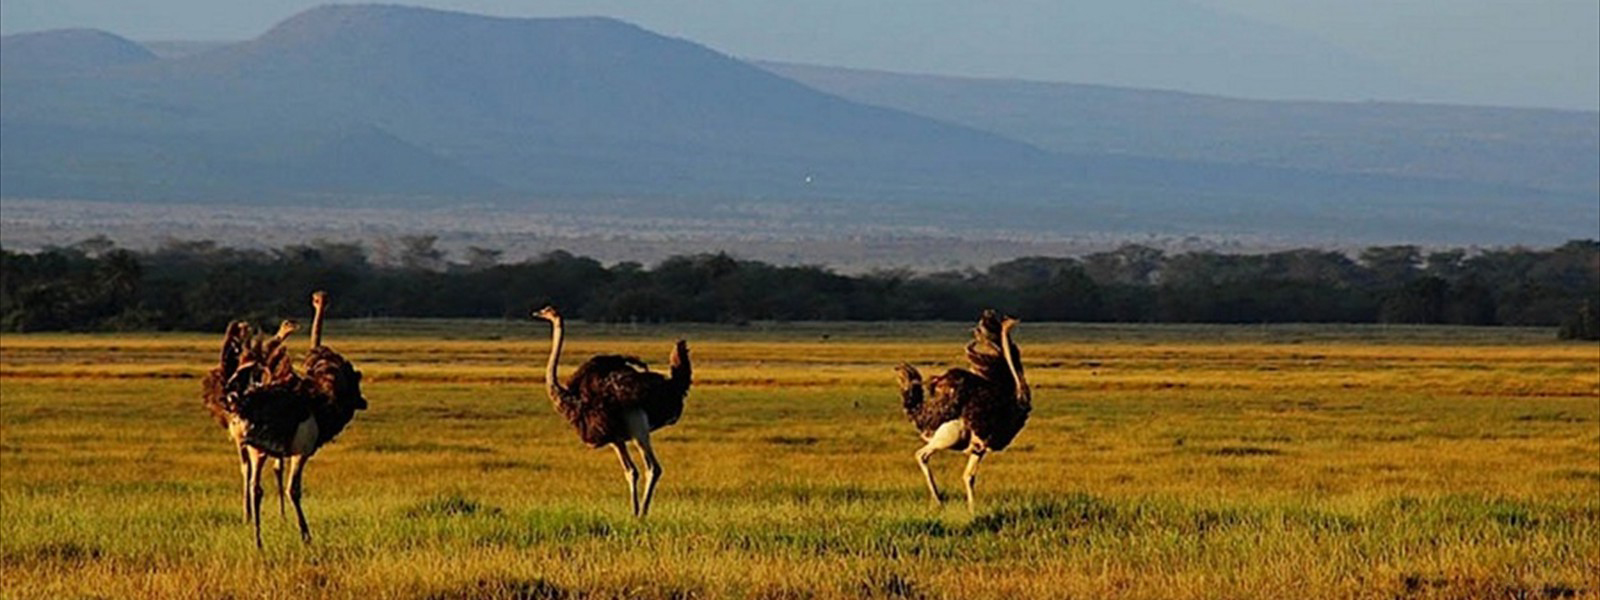 AMBOSELI NATIONAL PARK ATTRACTIONS, WHAT TO DO, TOURIST ACTIVITIES AMBOSELI NATIONAL PARK, ACTIVITIES AMBOSELI NATIONAL PARK, AMBOSELI NATIONAL RESERVE, BEST OFFERS, RATES, MOST POPULAR LODGES, MOST FAMOUS LODGES, LUXURY LODGES, 5 STAR LODGES, LUXURY LODGES LIKE KIBO VILLA, AMBOSELI TORTILIS, AMBOSELI SERENA LODGE, AMBOSELI SOPA LODGE, OL TUKAI, KIBO SAFARI CAMP, SENTRIM ABOSELI LODGE, AMBOSEI TORTILIS CAMP, AMBOSELI TAWI LODGE, AMBOSELI LODGE, SATAO ELERAI, KILIMANJAROS SAFARI CAMP, AA LODGES, BIRD WATCHING, BIRDS OF AMBOSELI, GAME DRIVES, CLIMBING KILIMANJARO, HIKING KILIMANJARO